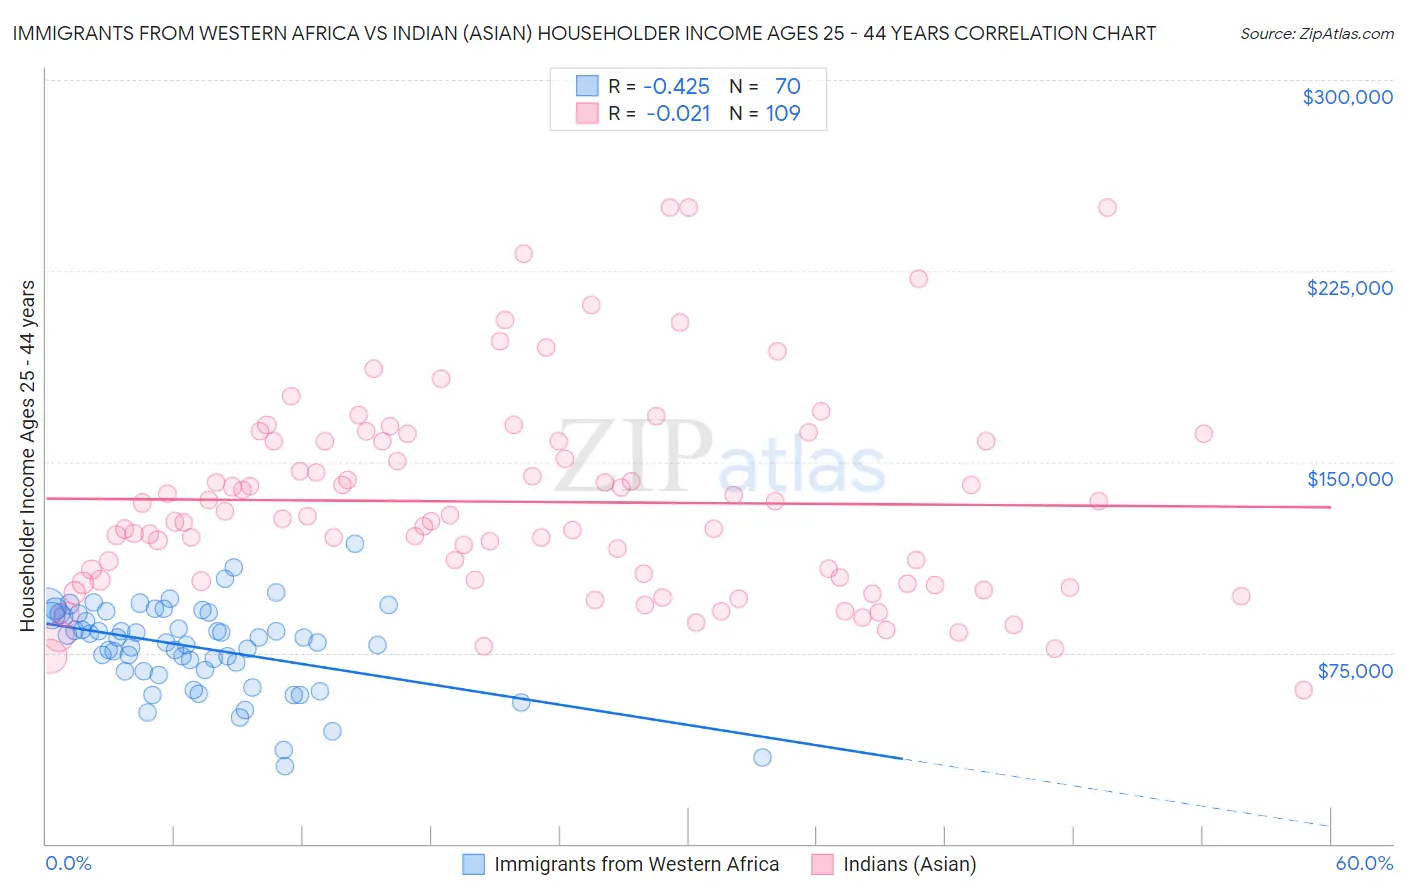 Immigrants from Western Africa vs Indian (Asian) Householder Income Ages 25 - 44 years